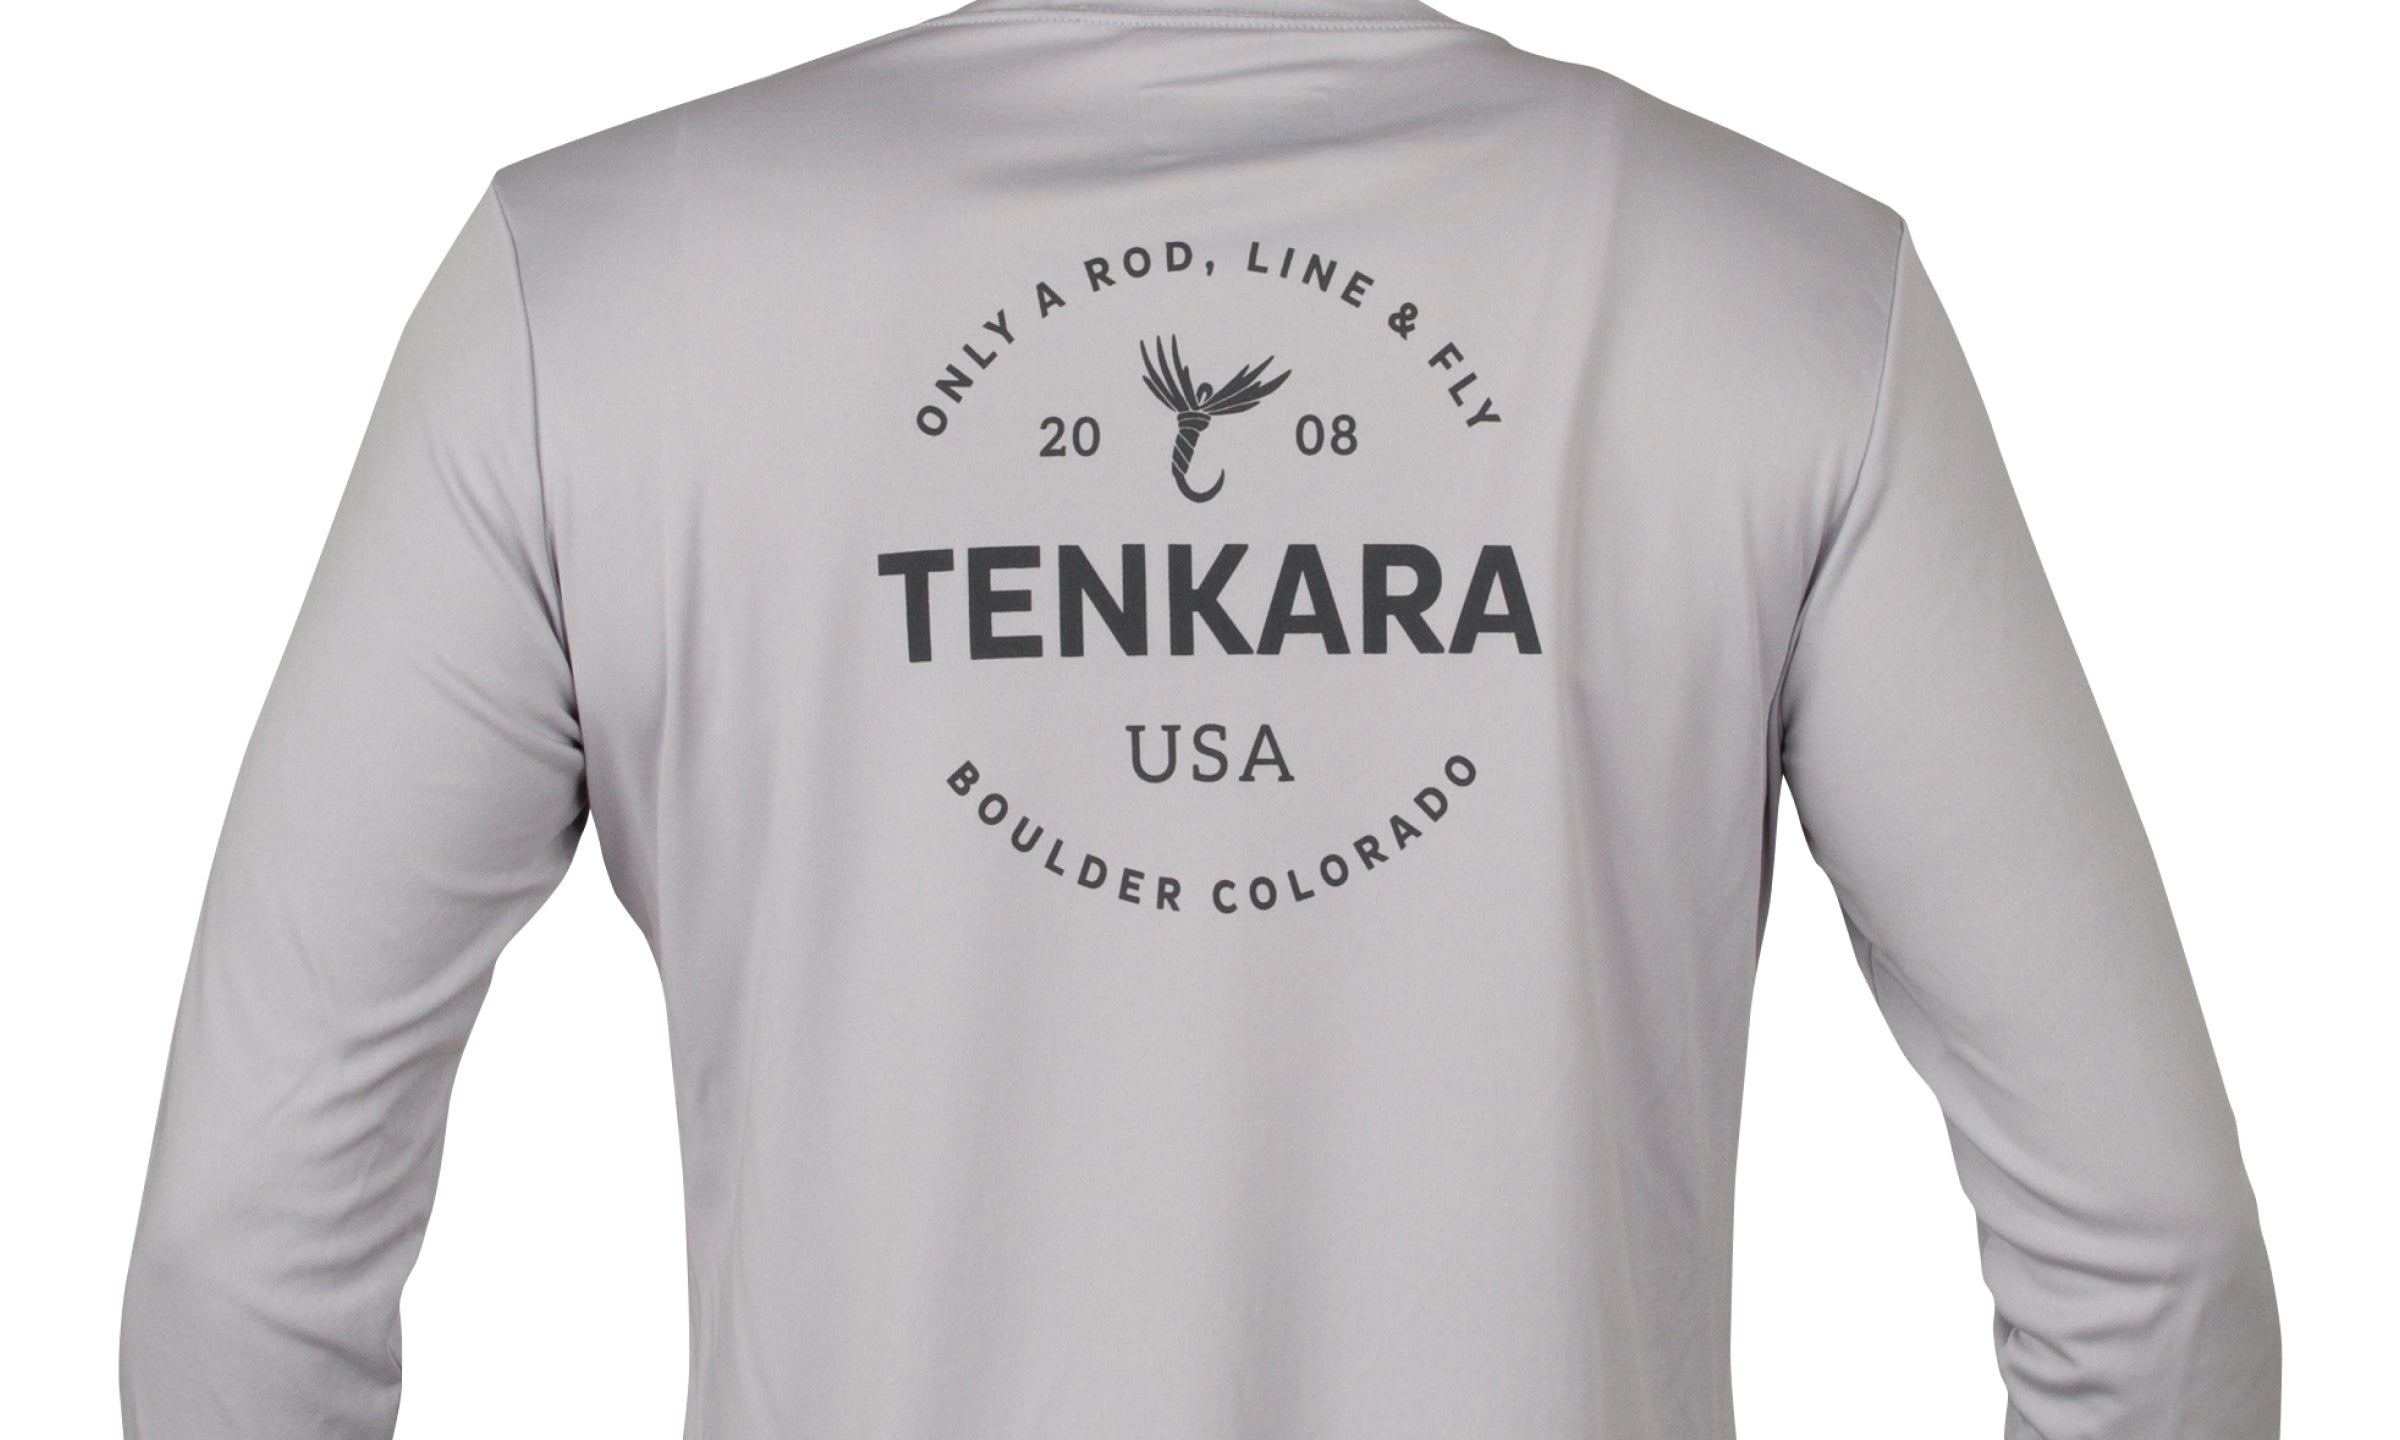 Elevated Fly Fishing - Graphic T Shirt – Red Brook Tenkara